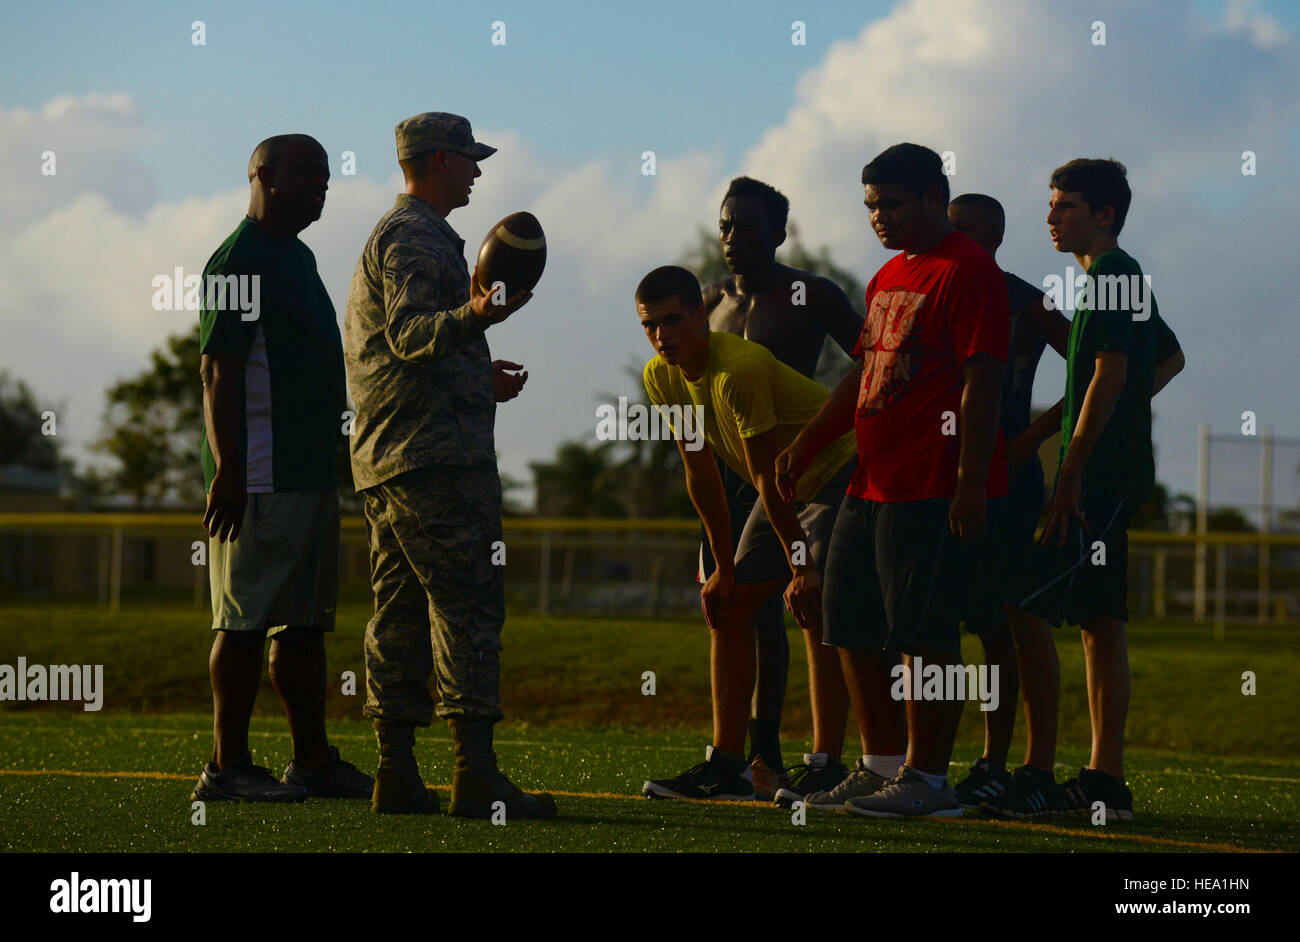 Jacob Dowdell, Guam High School head coach, left, supervises Senior Airman Presley Griffith, 36th Mobility Response Squadron executive assistant, second from left, as he teaches a free football spring practice camp June 8, at Andersen Air Force Base, Guam. Griffith hopes to someday become a high school football coach and volunteers his time to offer an additional pre-season training opportunity to local high school athletes.  Senior Airman Alexander W. Riedel Stock Photo